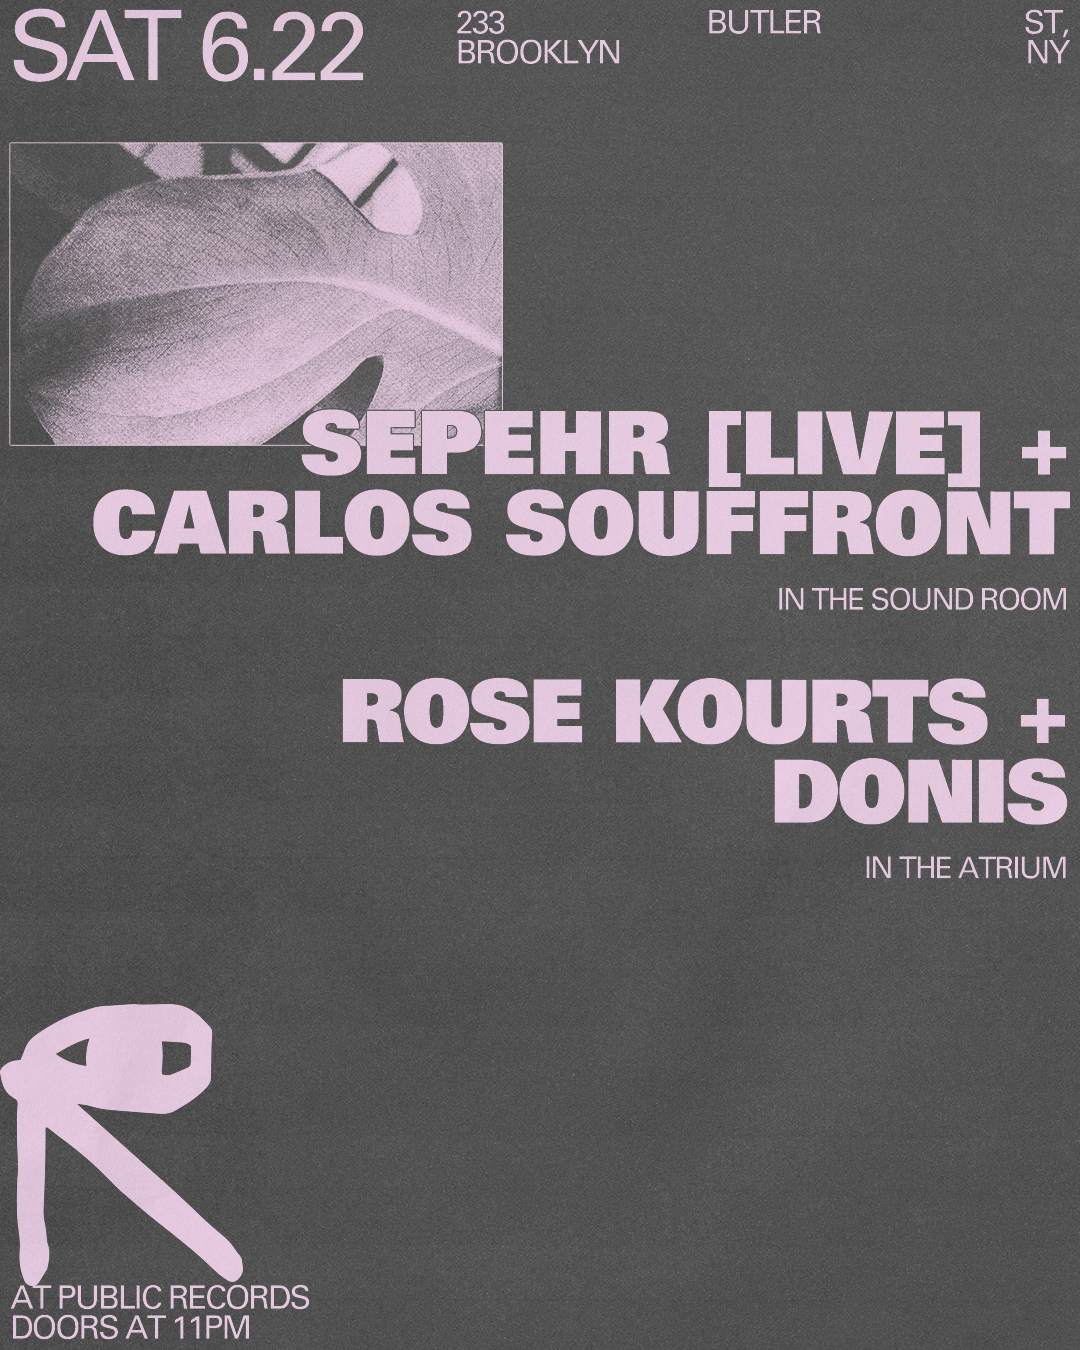 Sepehr [live] + Carlos Souffront / Rose Kourts + Donis - フライヤー表